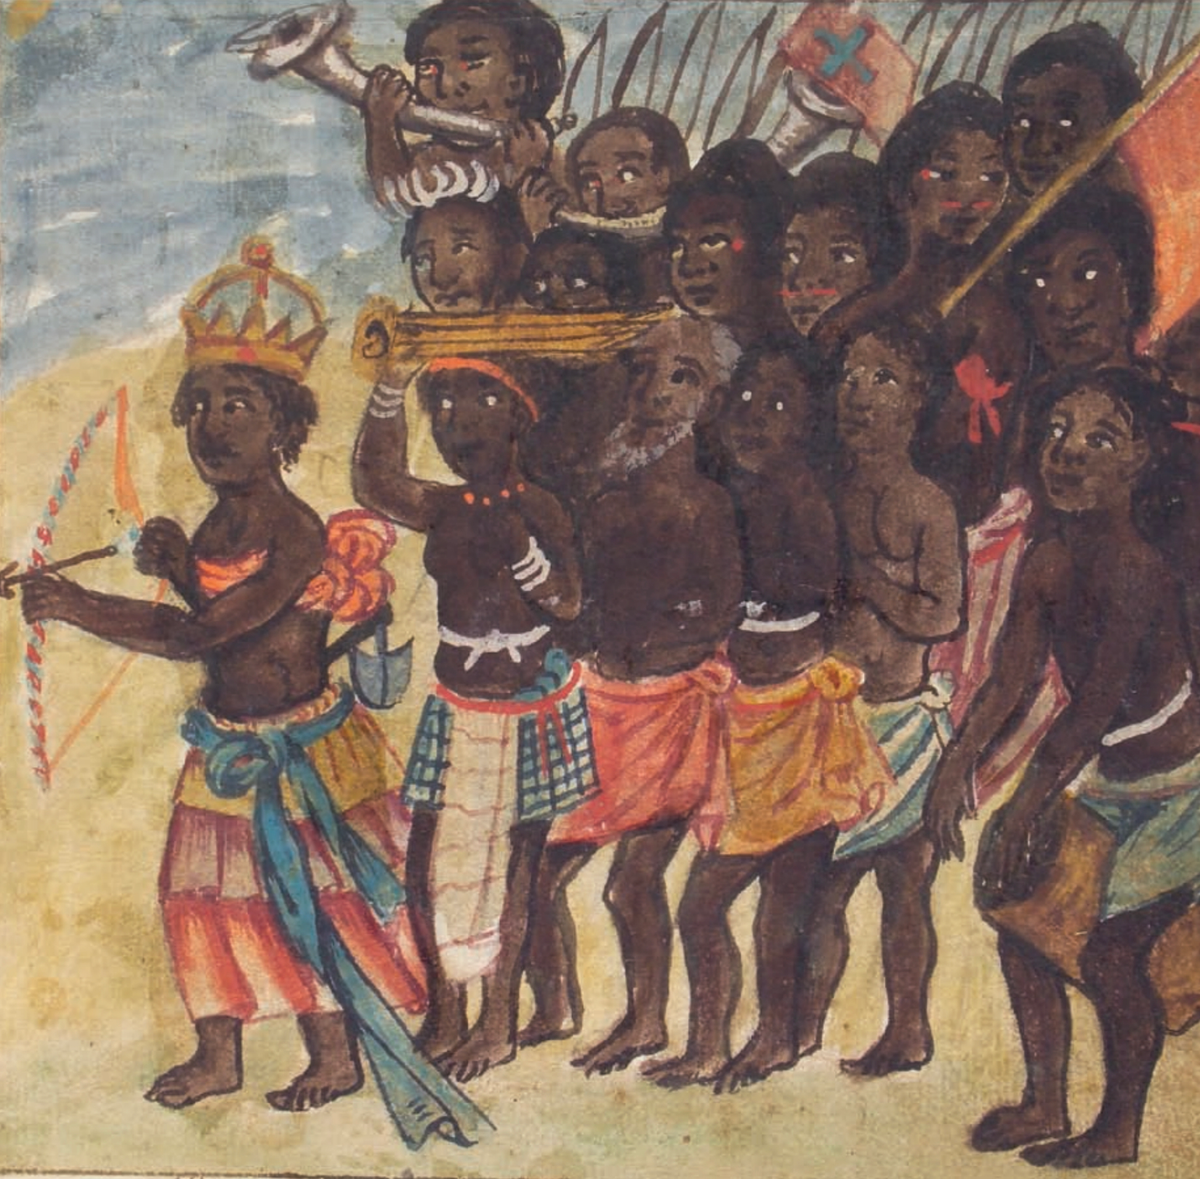 “We Cannot Reckon How Great the Damage Is”: Origins of the Transatlantic Slave System, c.1450 - c.1650